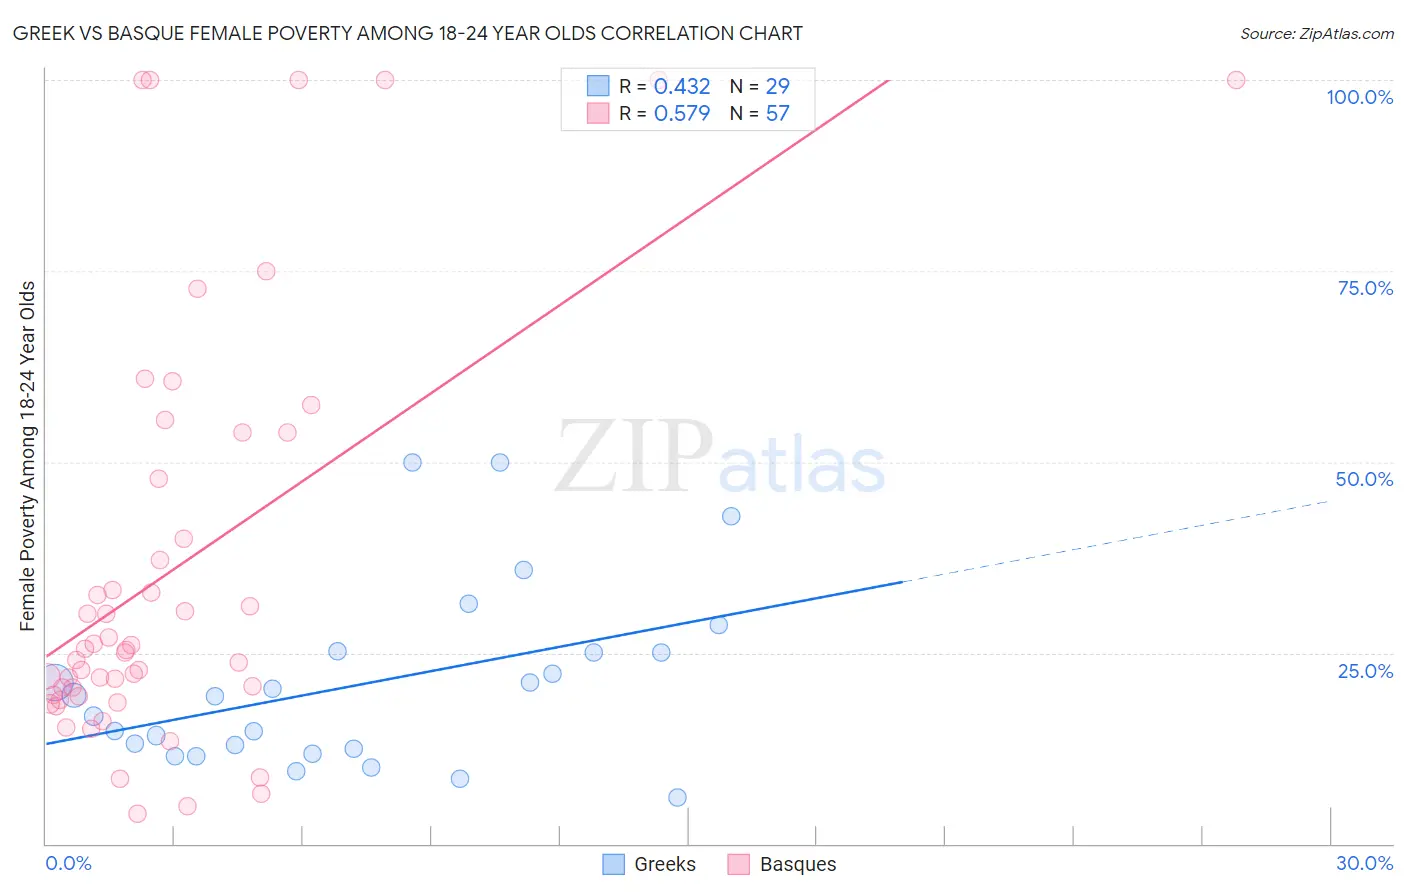 Greek vs Basque Female Poverty Among 18-24 Year Olds